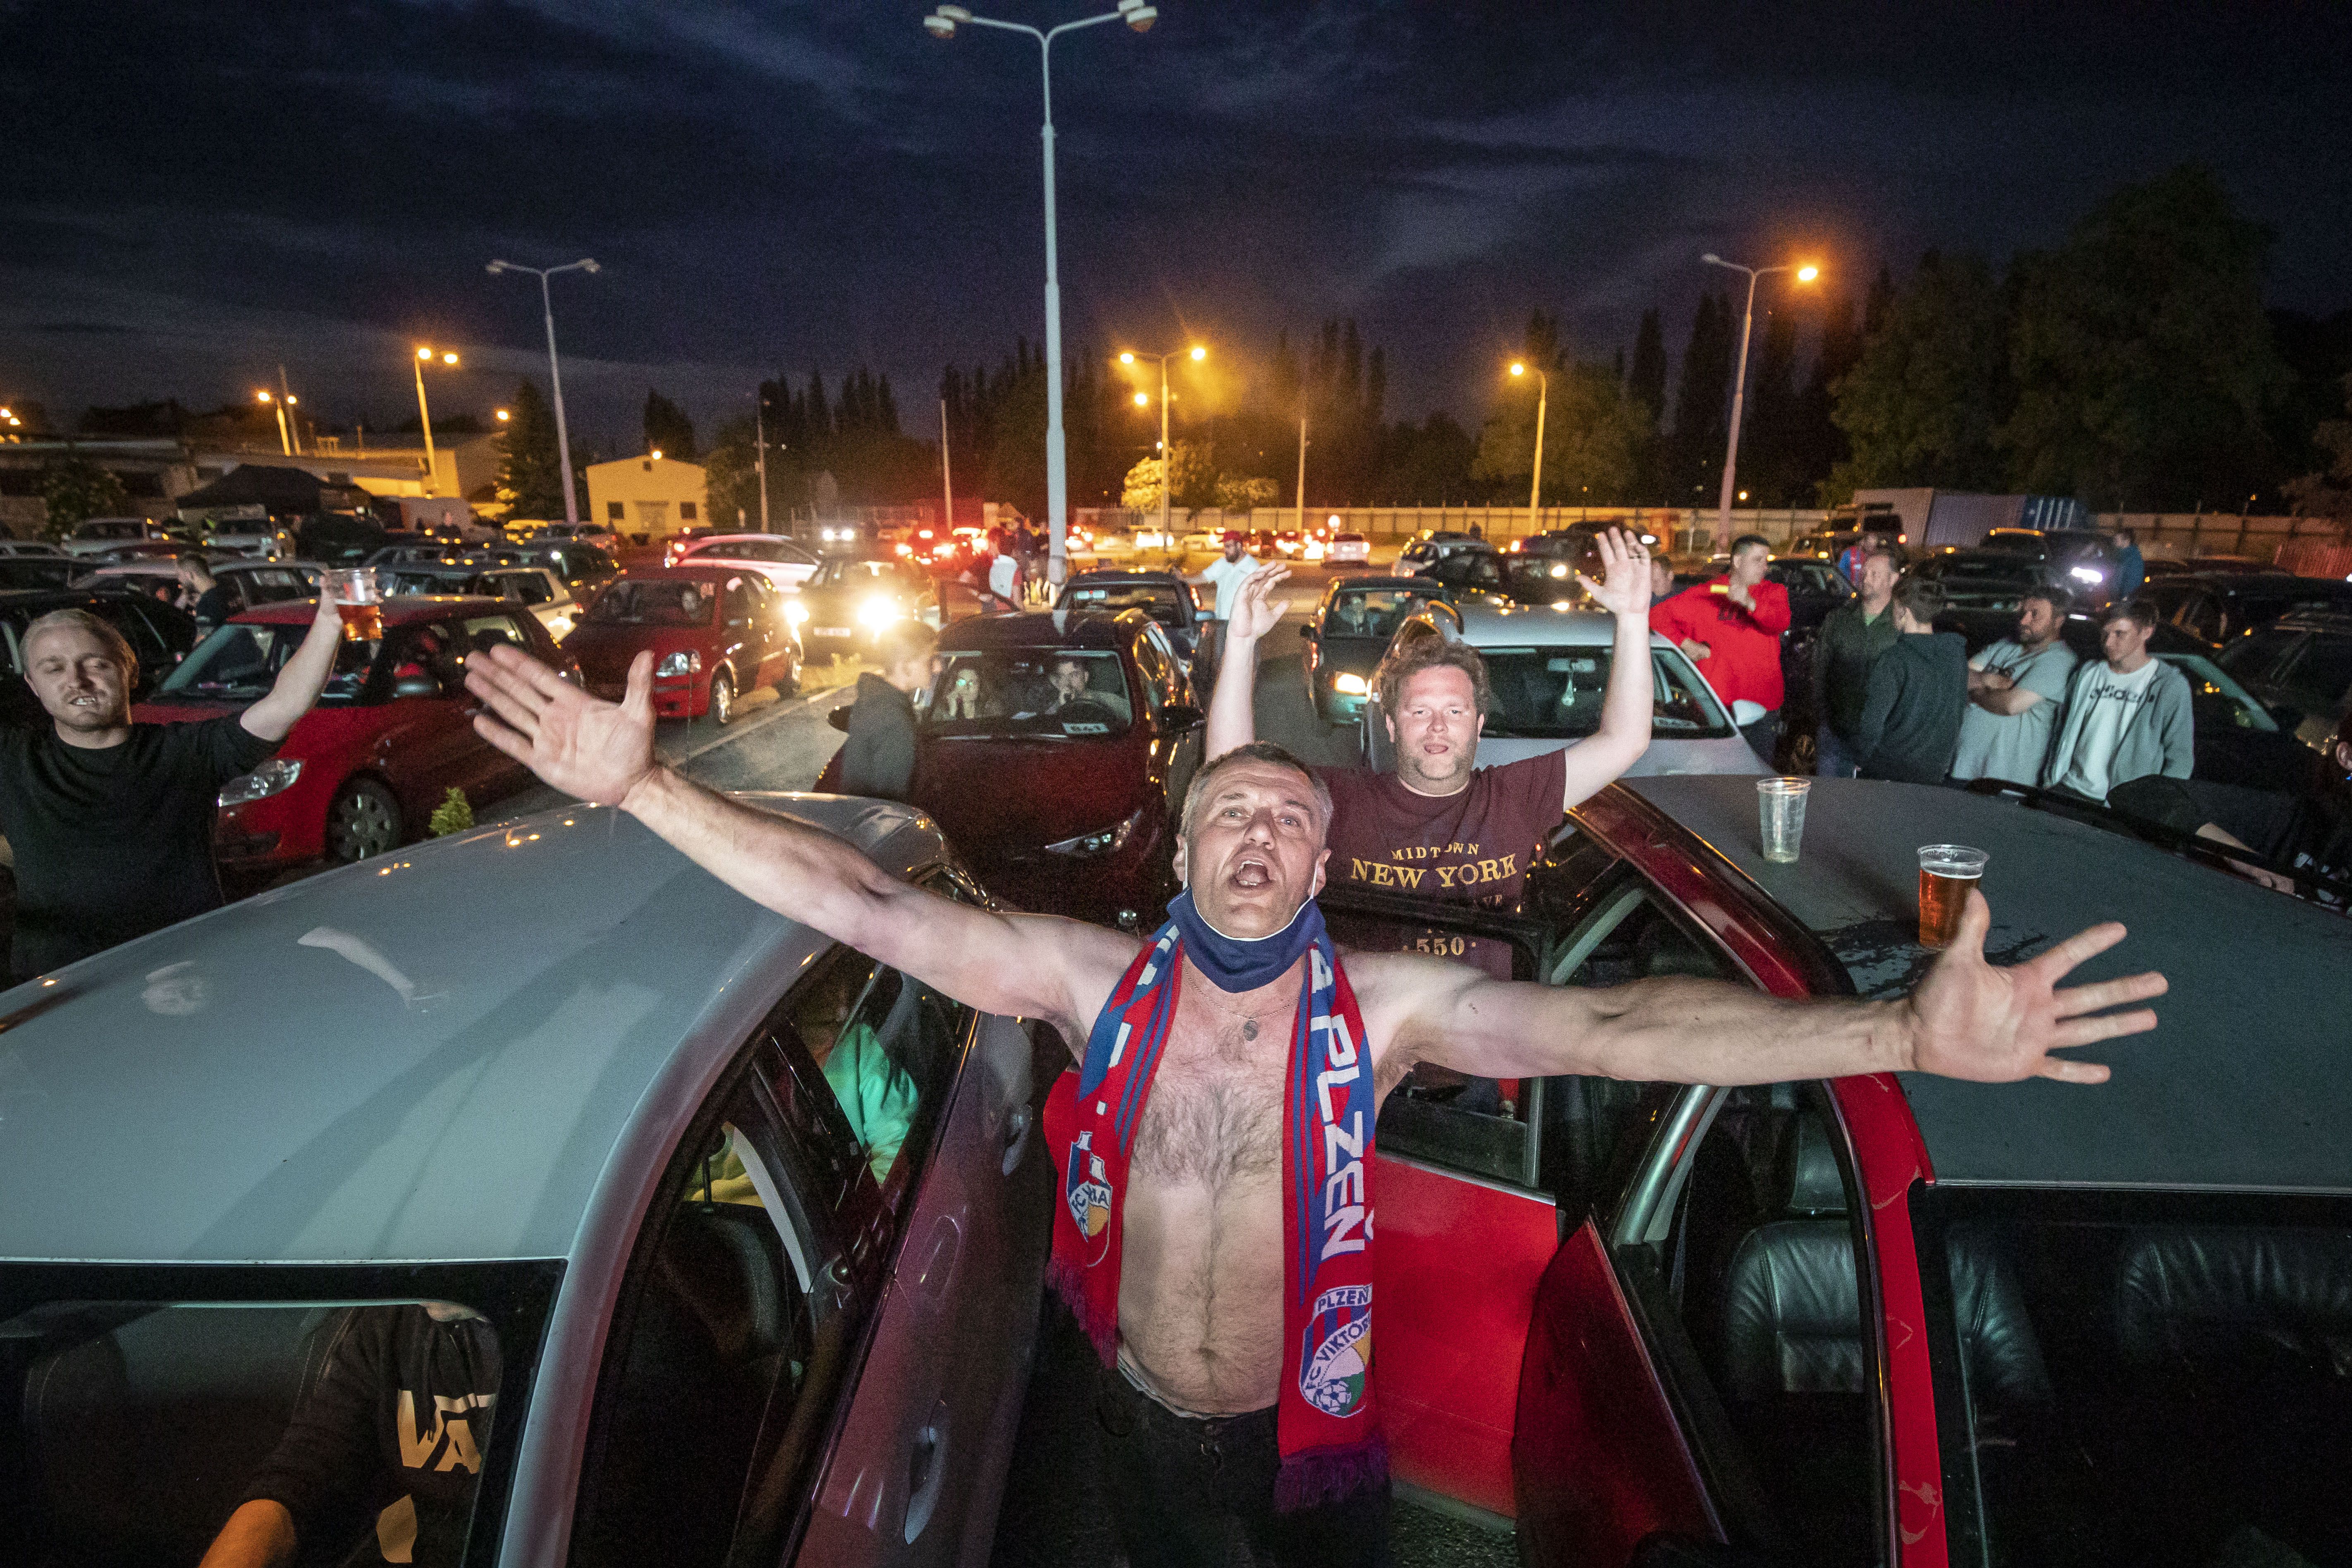 Soccer fans at drive-in theater